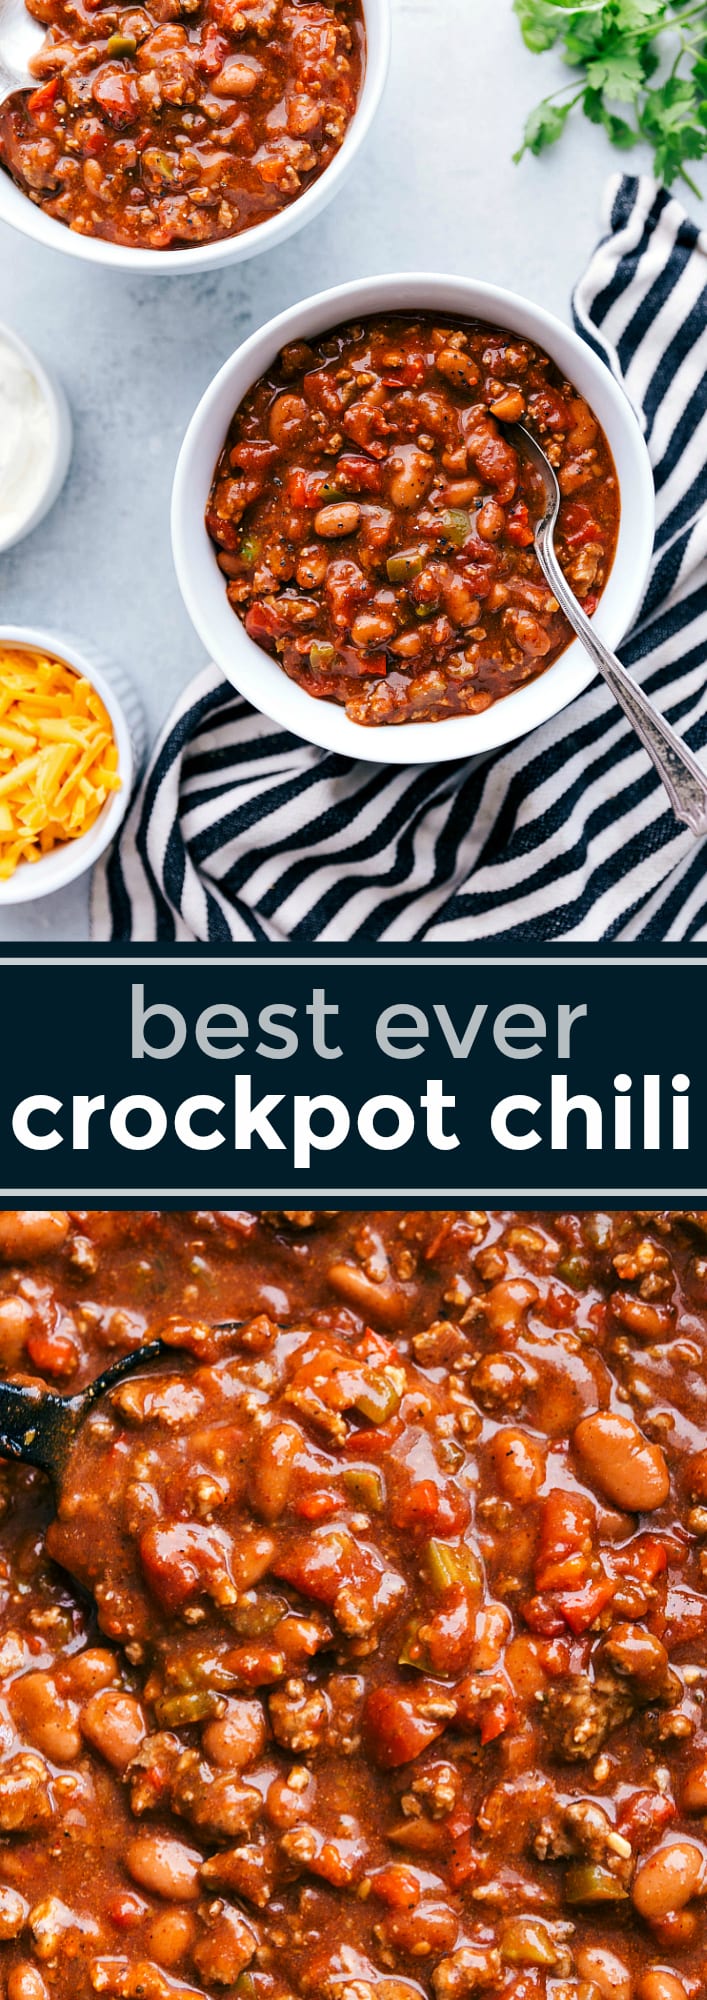 A delicious crockpot chili with dozens of 5-star reviews and winner of multiple chili cook-offs! This crockpot chili recipe winner is made with plenty of spice and packed with lots of flavor! via chelseasmessyapron.com #crockpot #slowcooker #chili #easy #quick #dinner #kidfriendly #beans #sausage #beef #cookoff #contest